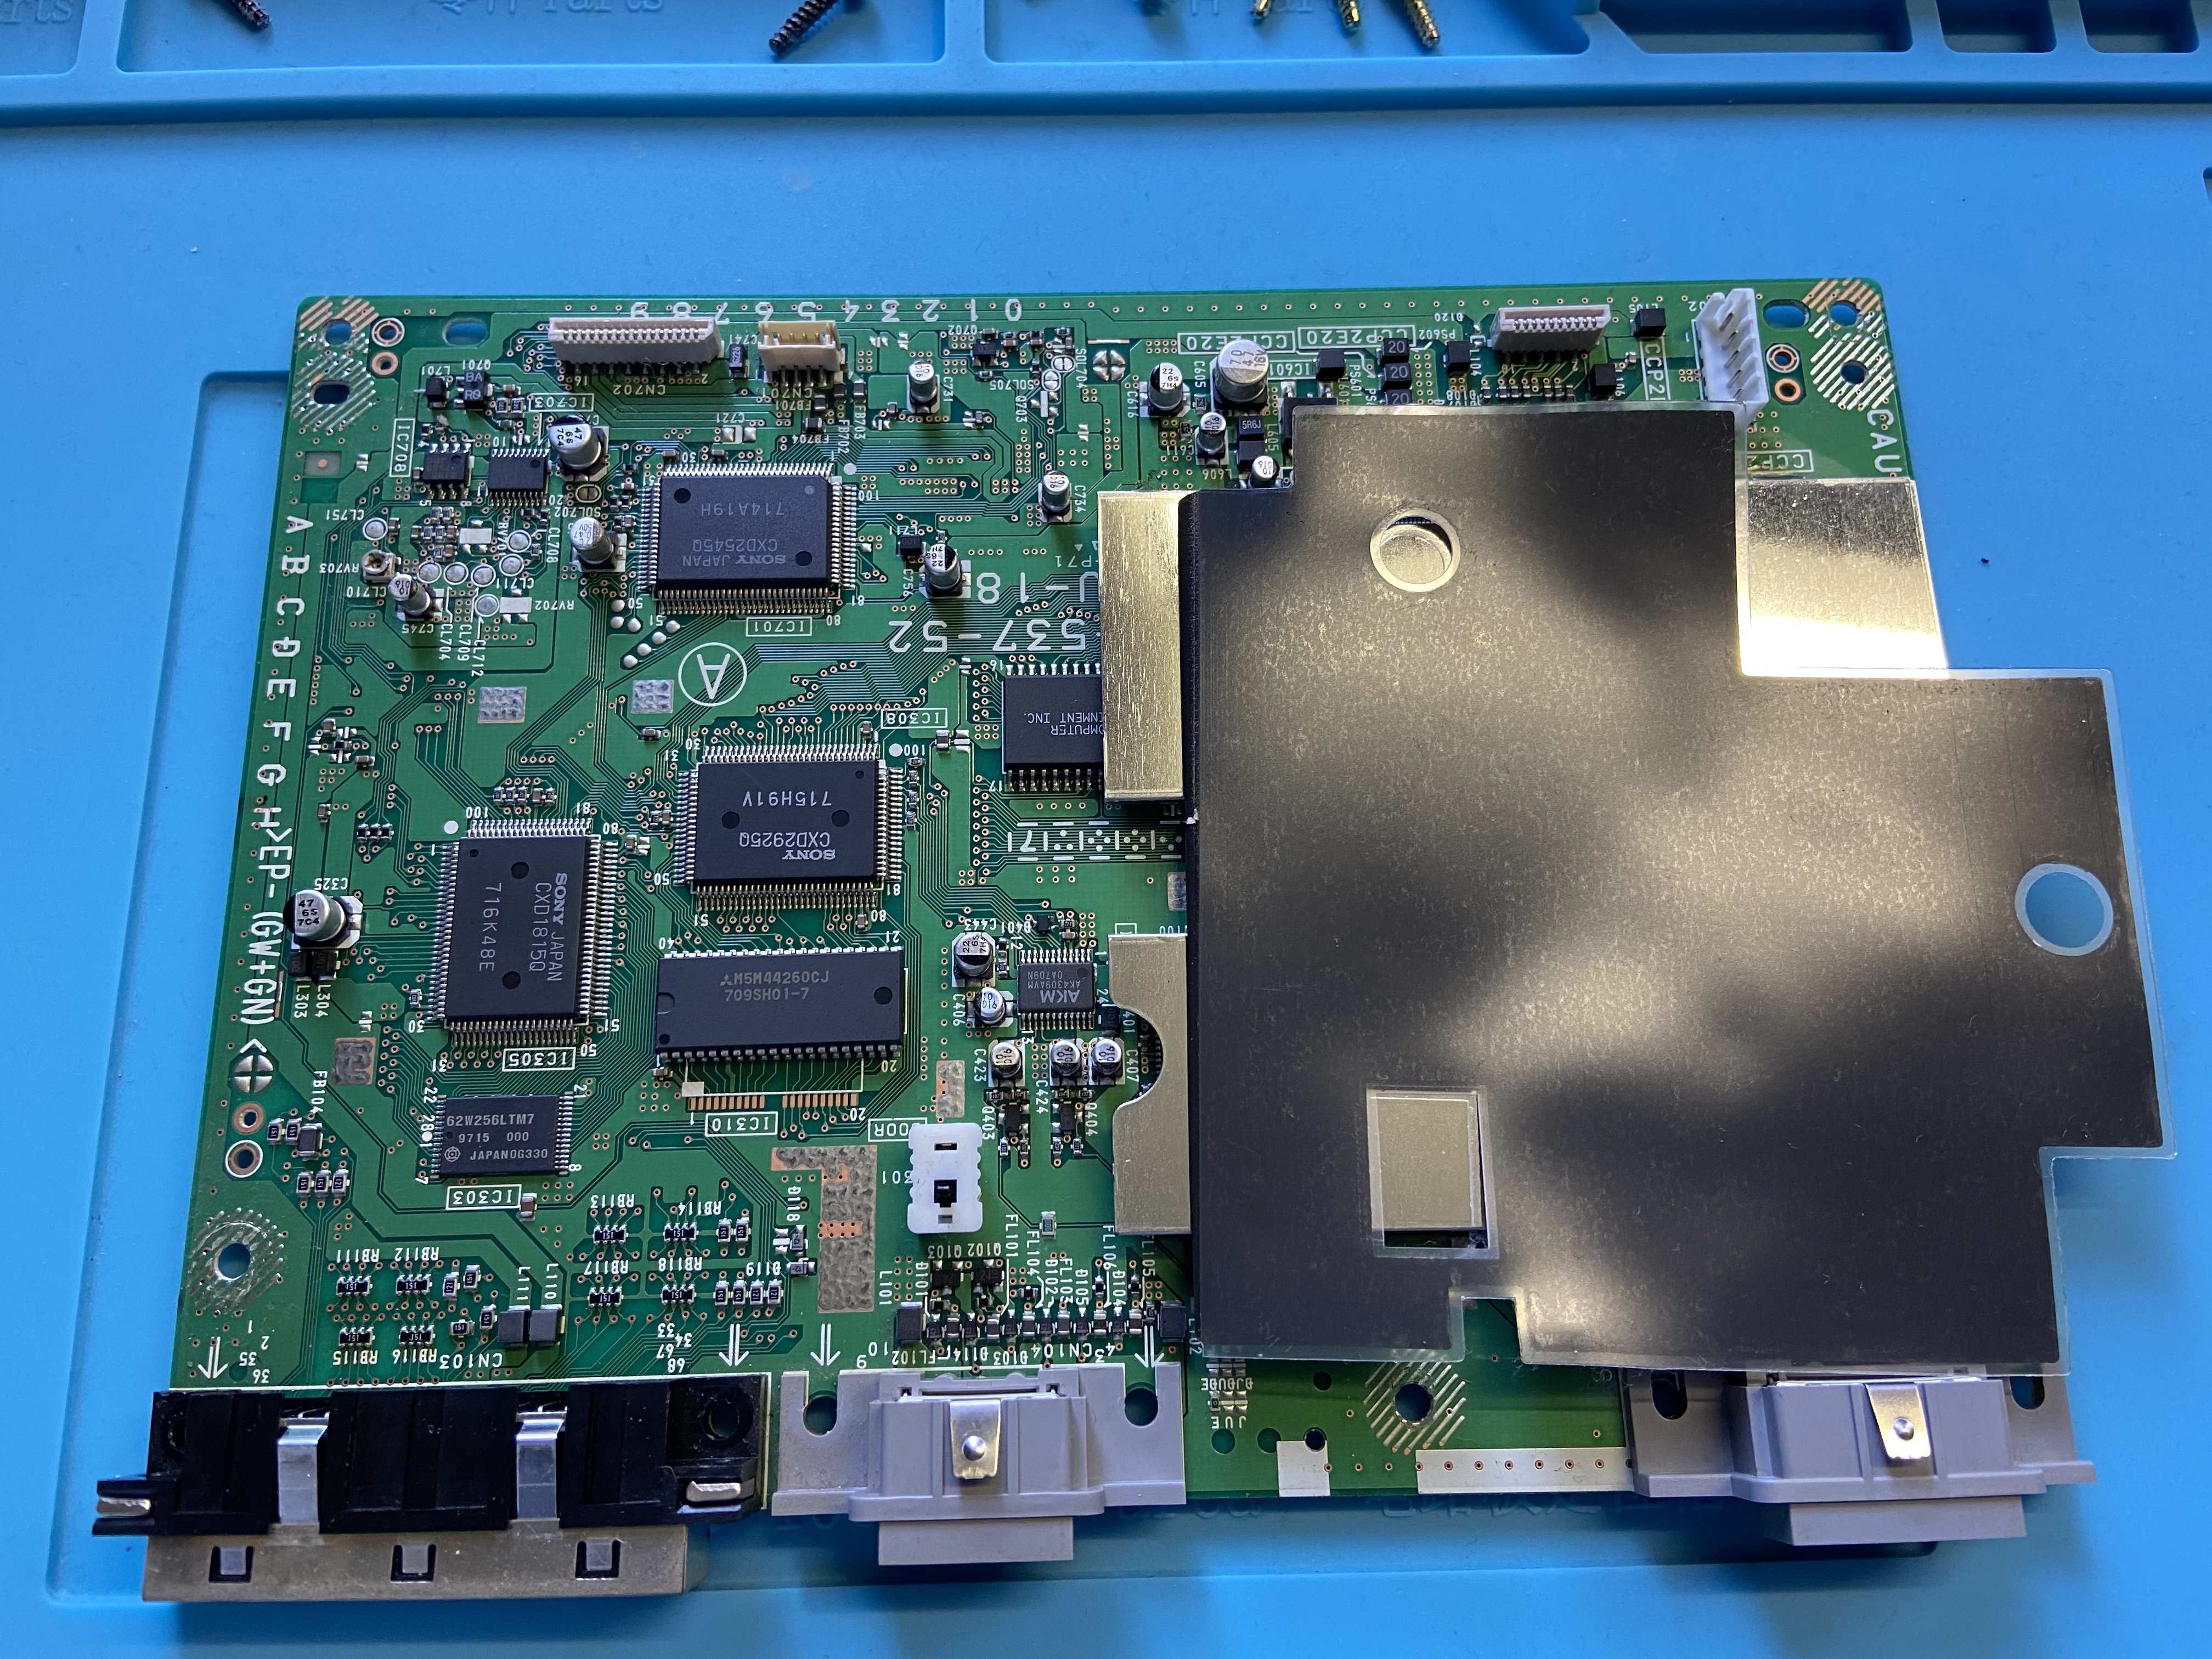 Motherboard removed from a PlayStation